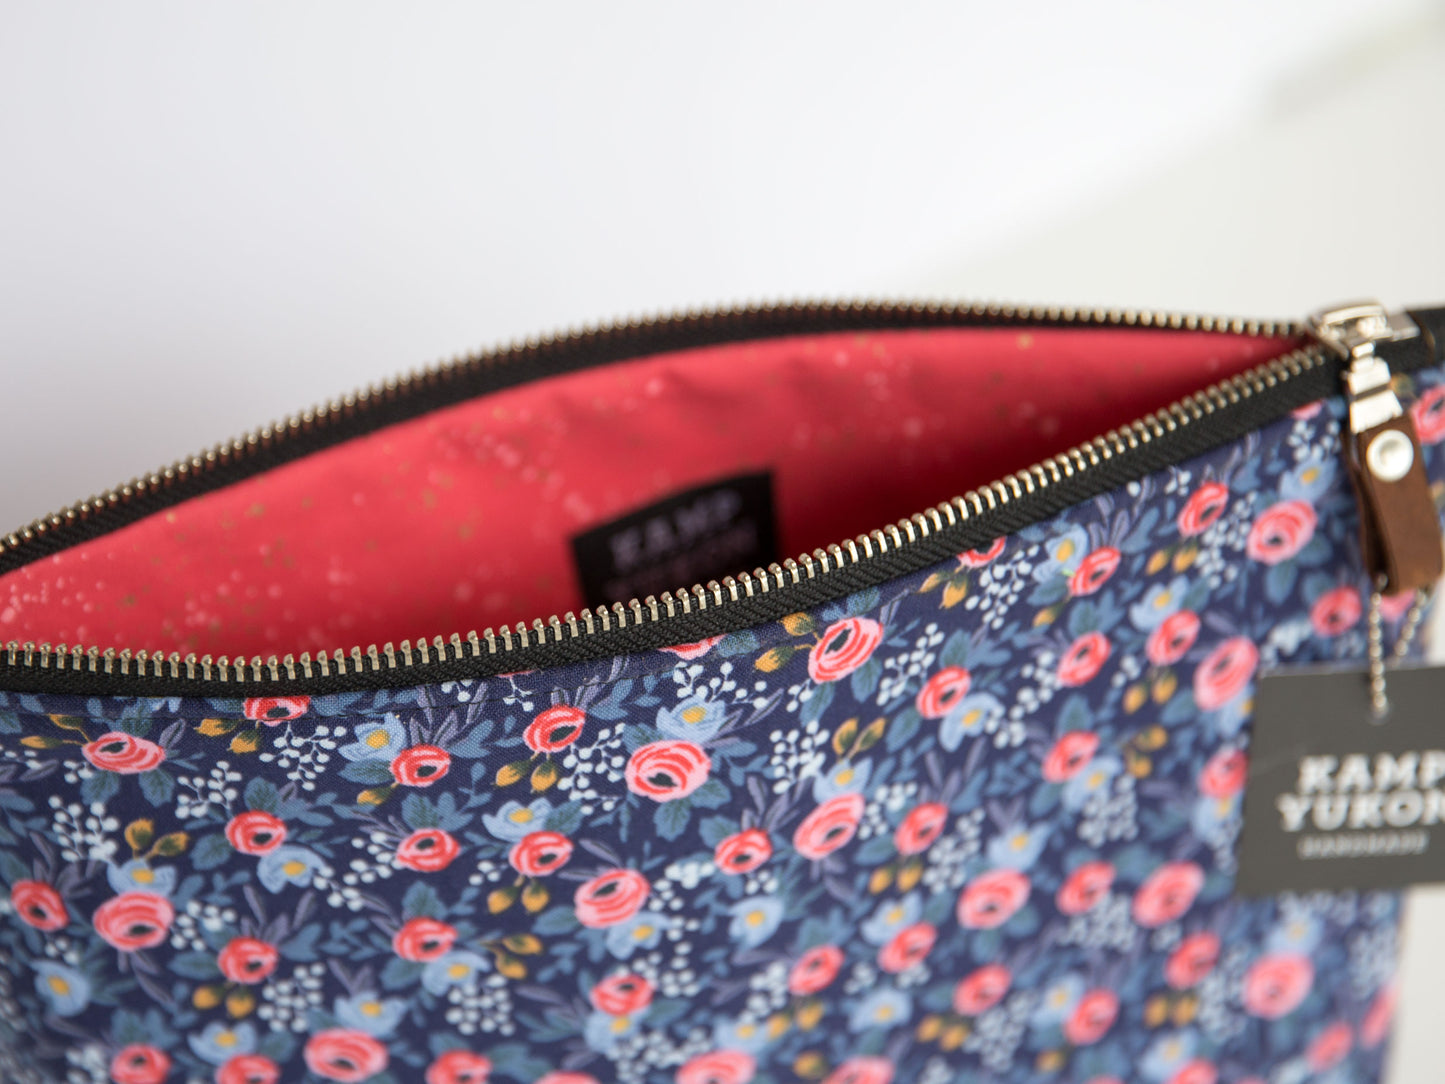 Large Pouch - Rosa - Navy